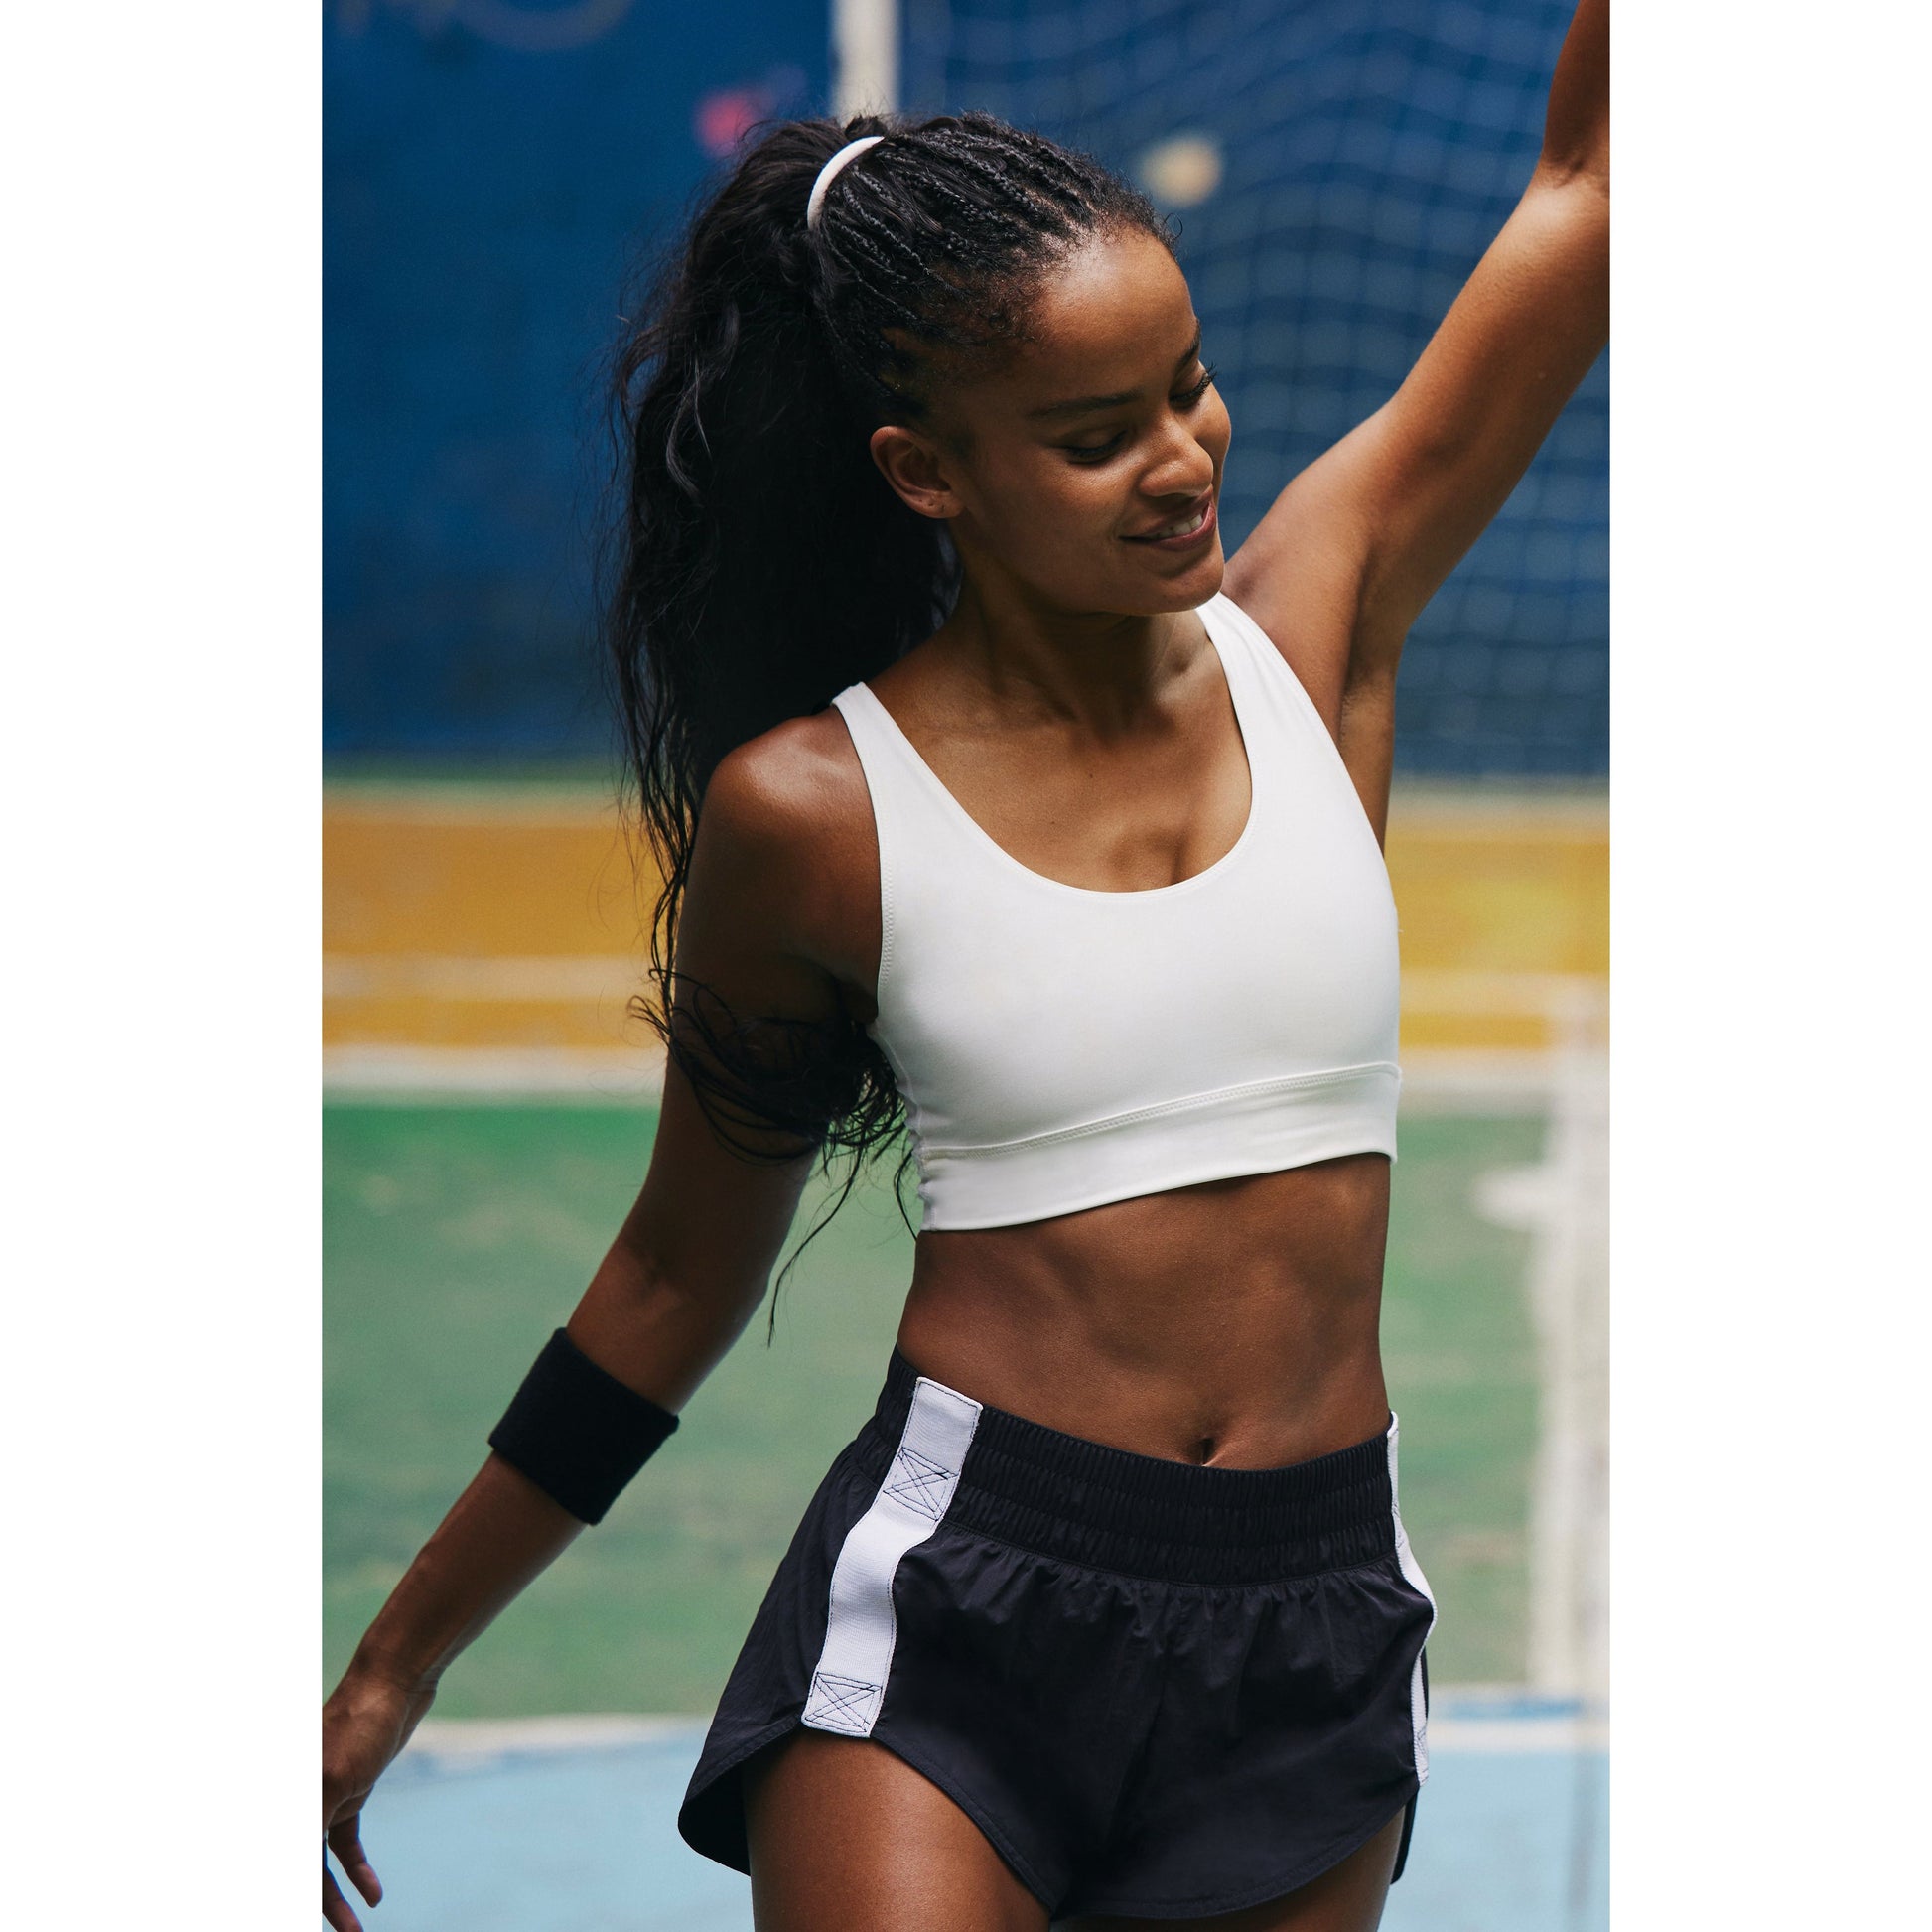 A young woman in Free People Movement's Trail Angel Short, Black Combo dancing joyfully on a basketball court.